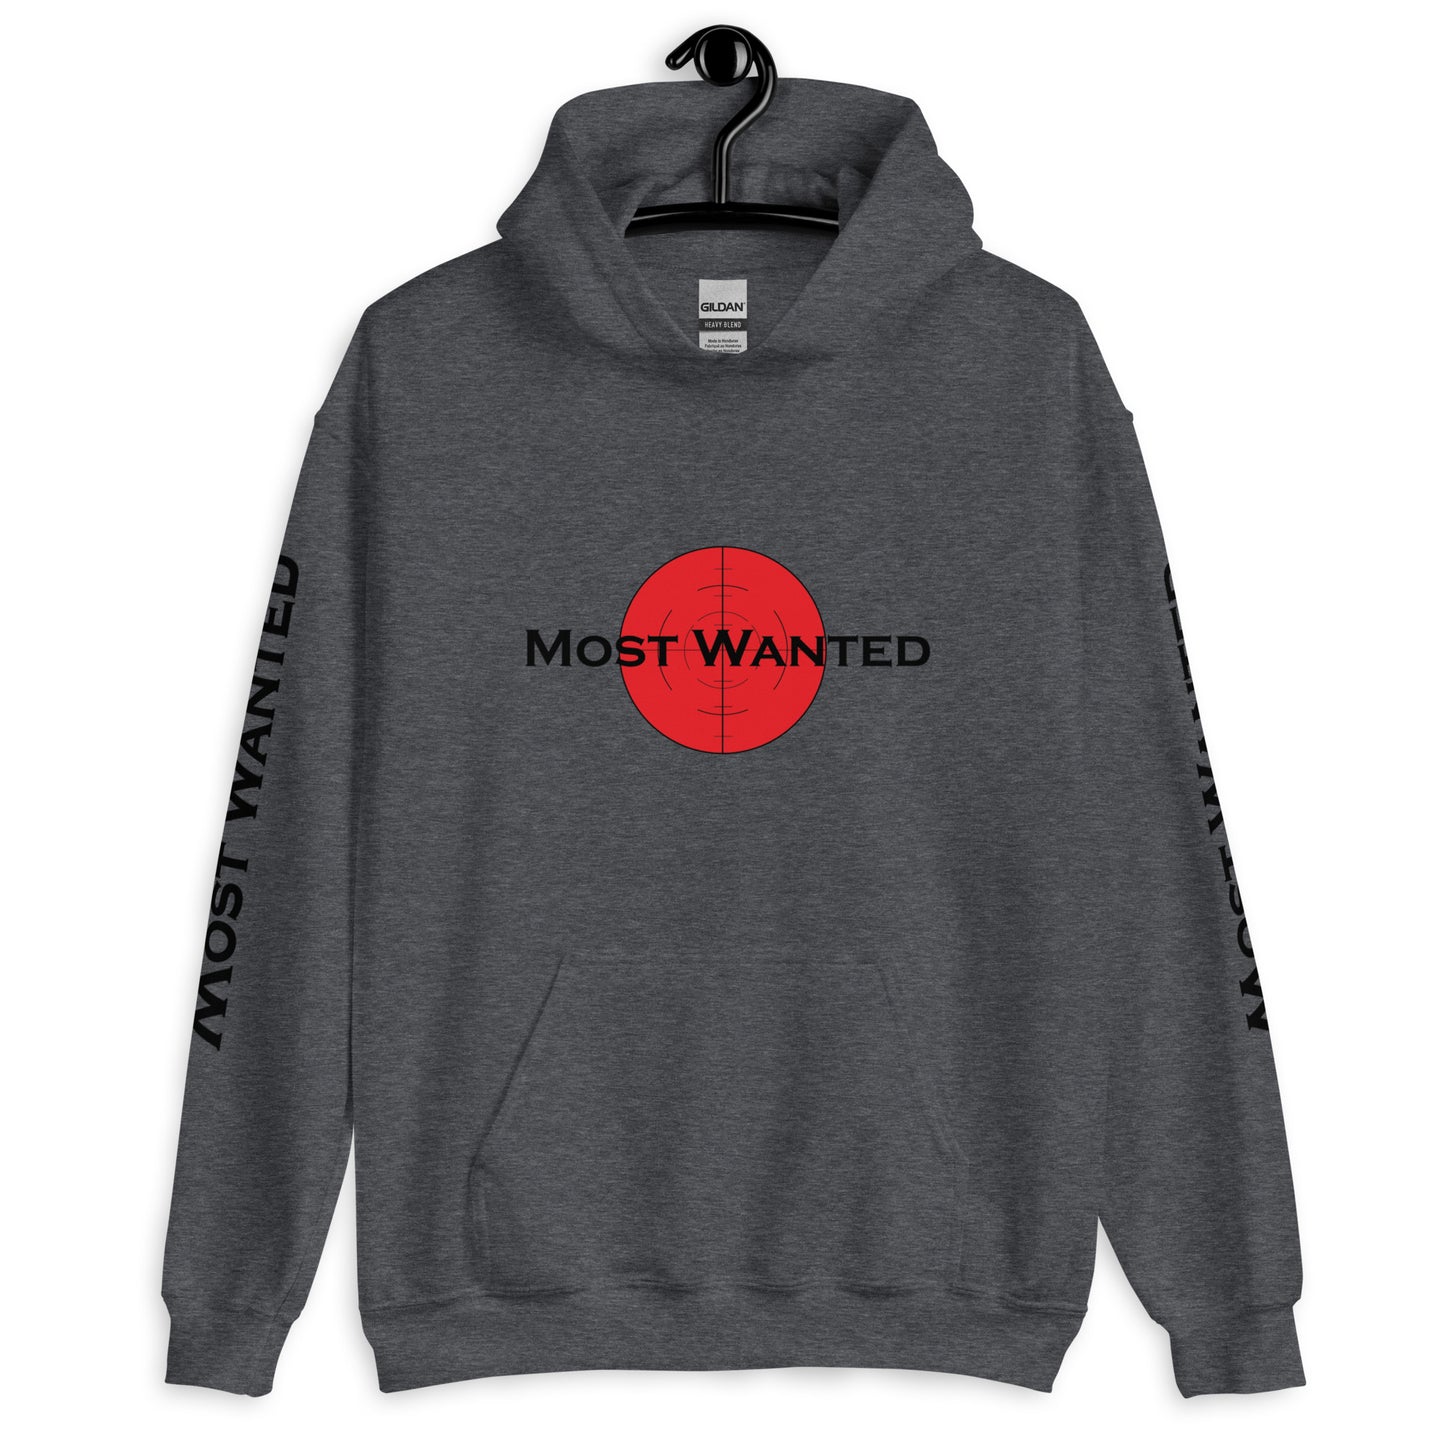 MOST WANTED WHITE OG HOODIE #1 ⭐⭐